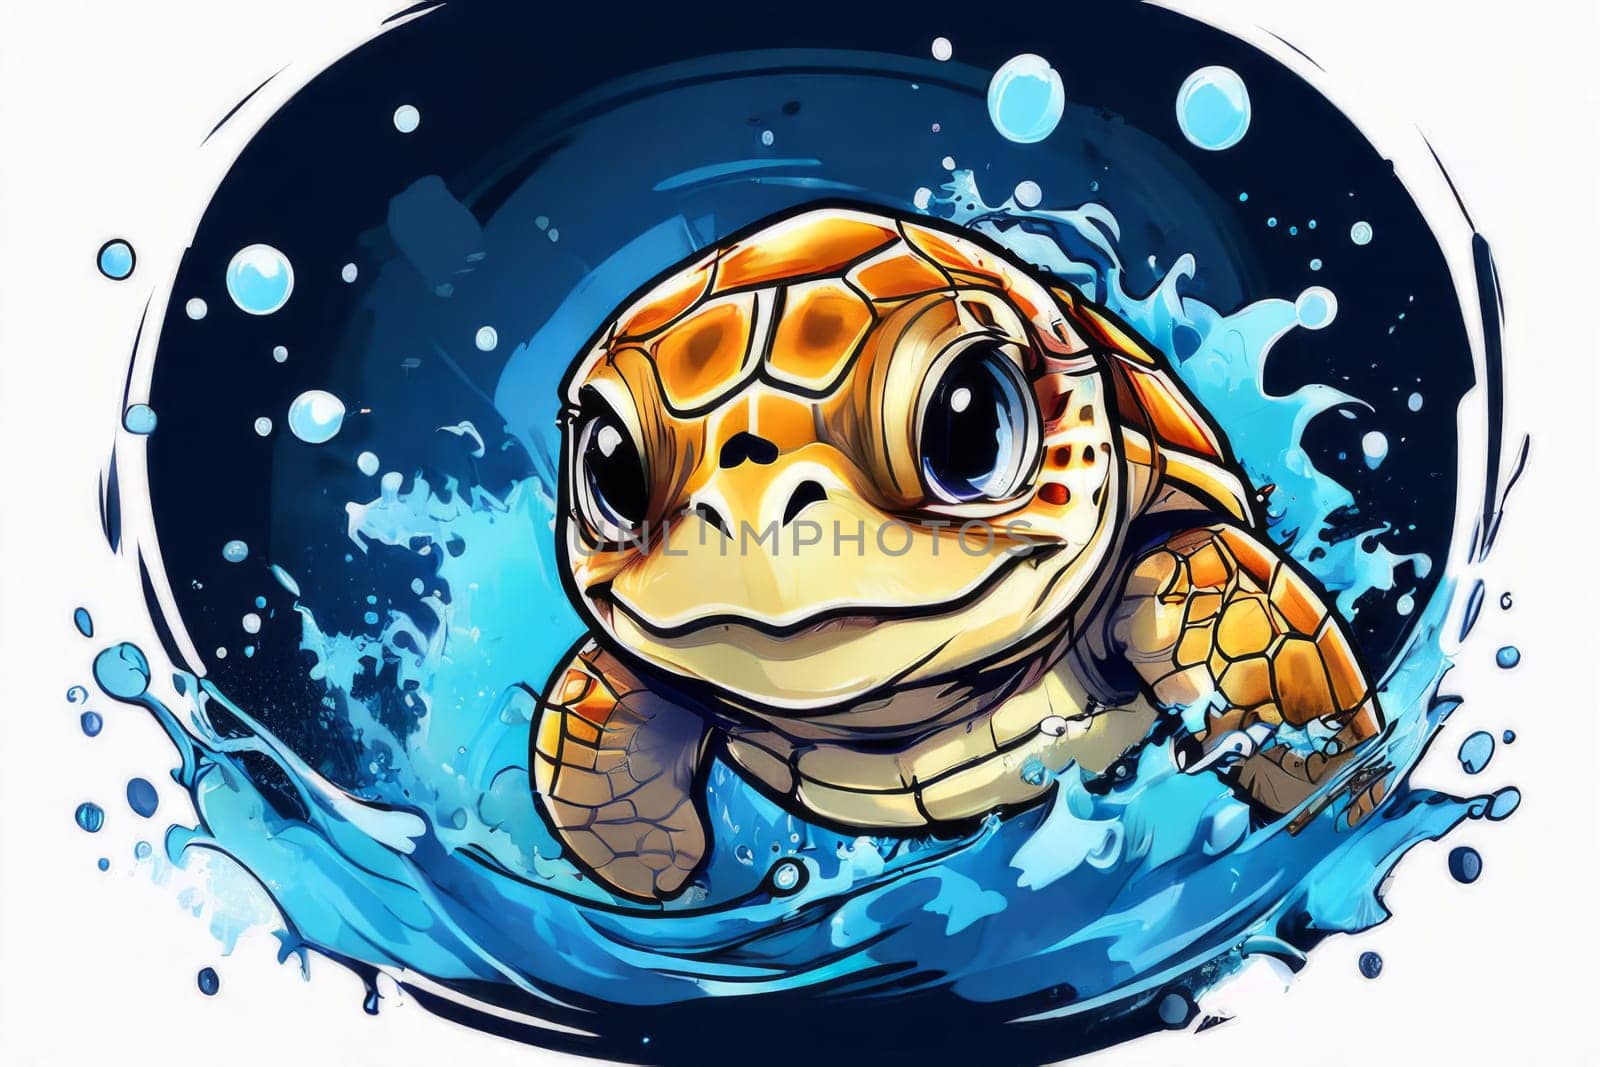 Turtle riding wave on white background. For Tshirt design, posters, postcards, other merchandise with marine theme, childrens books, educational materials for kids, tourism, stationery